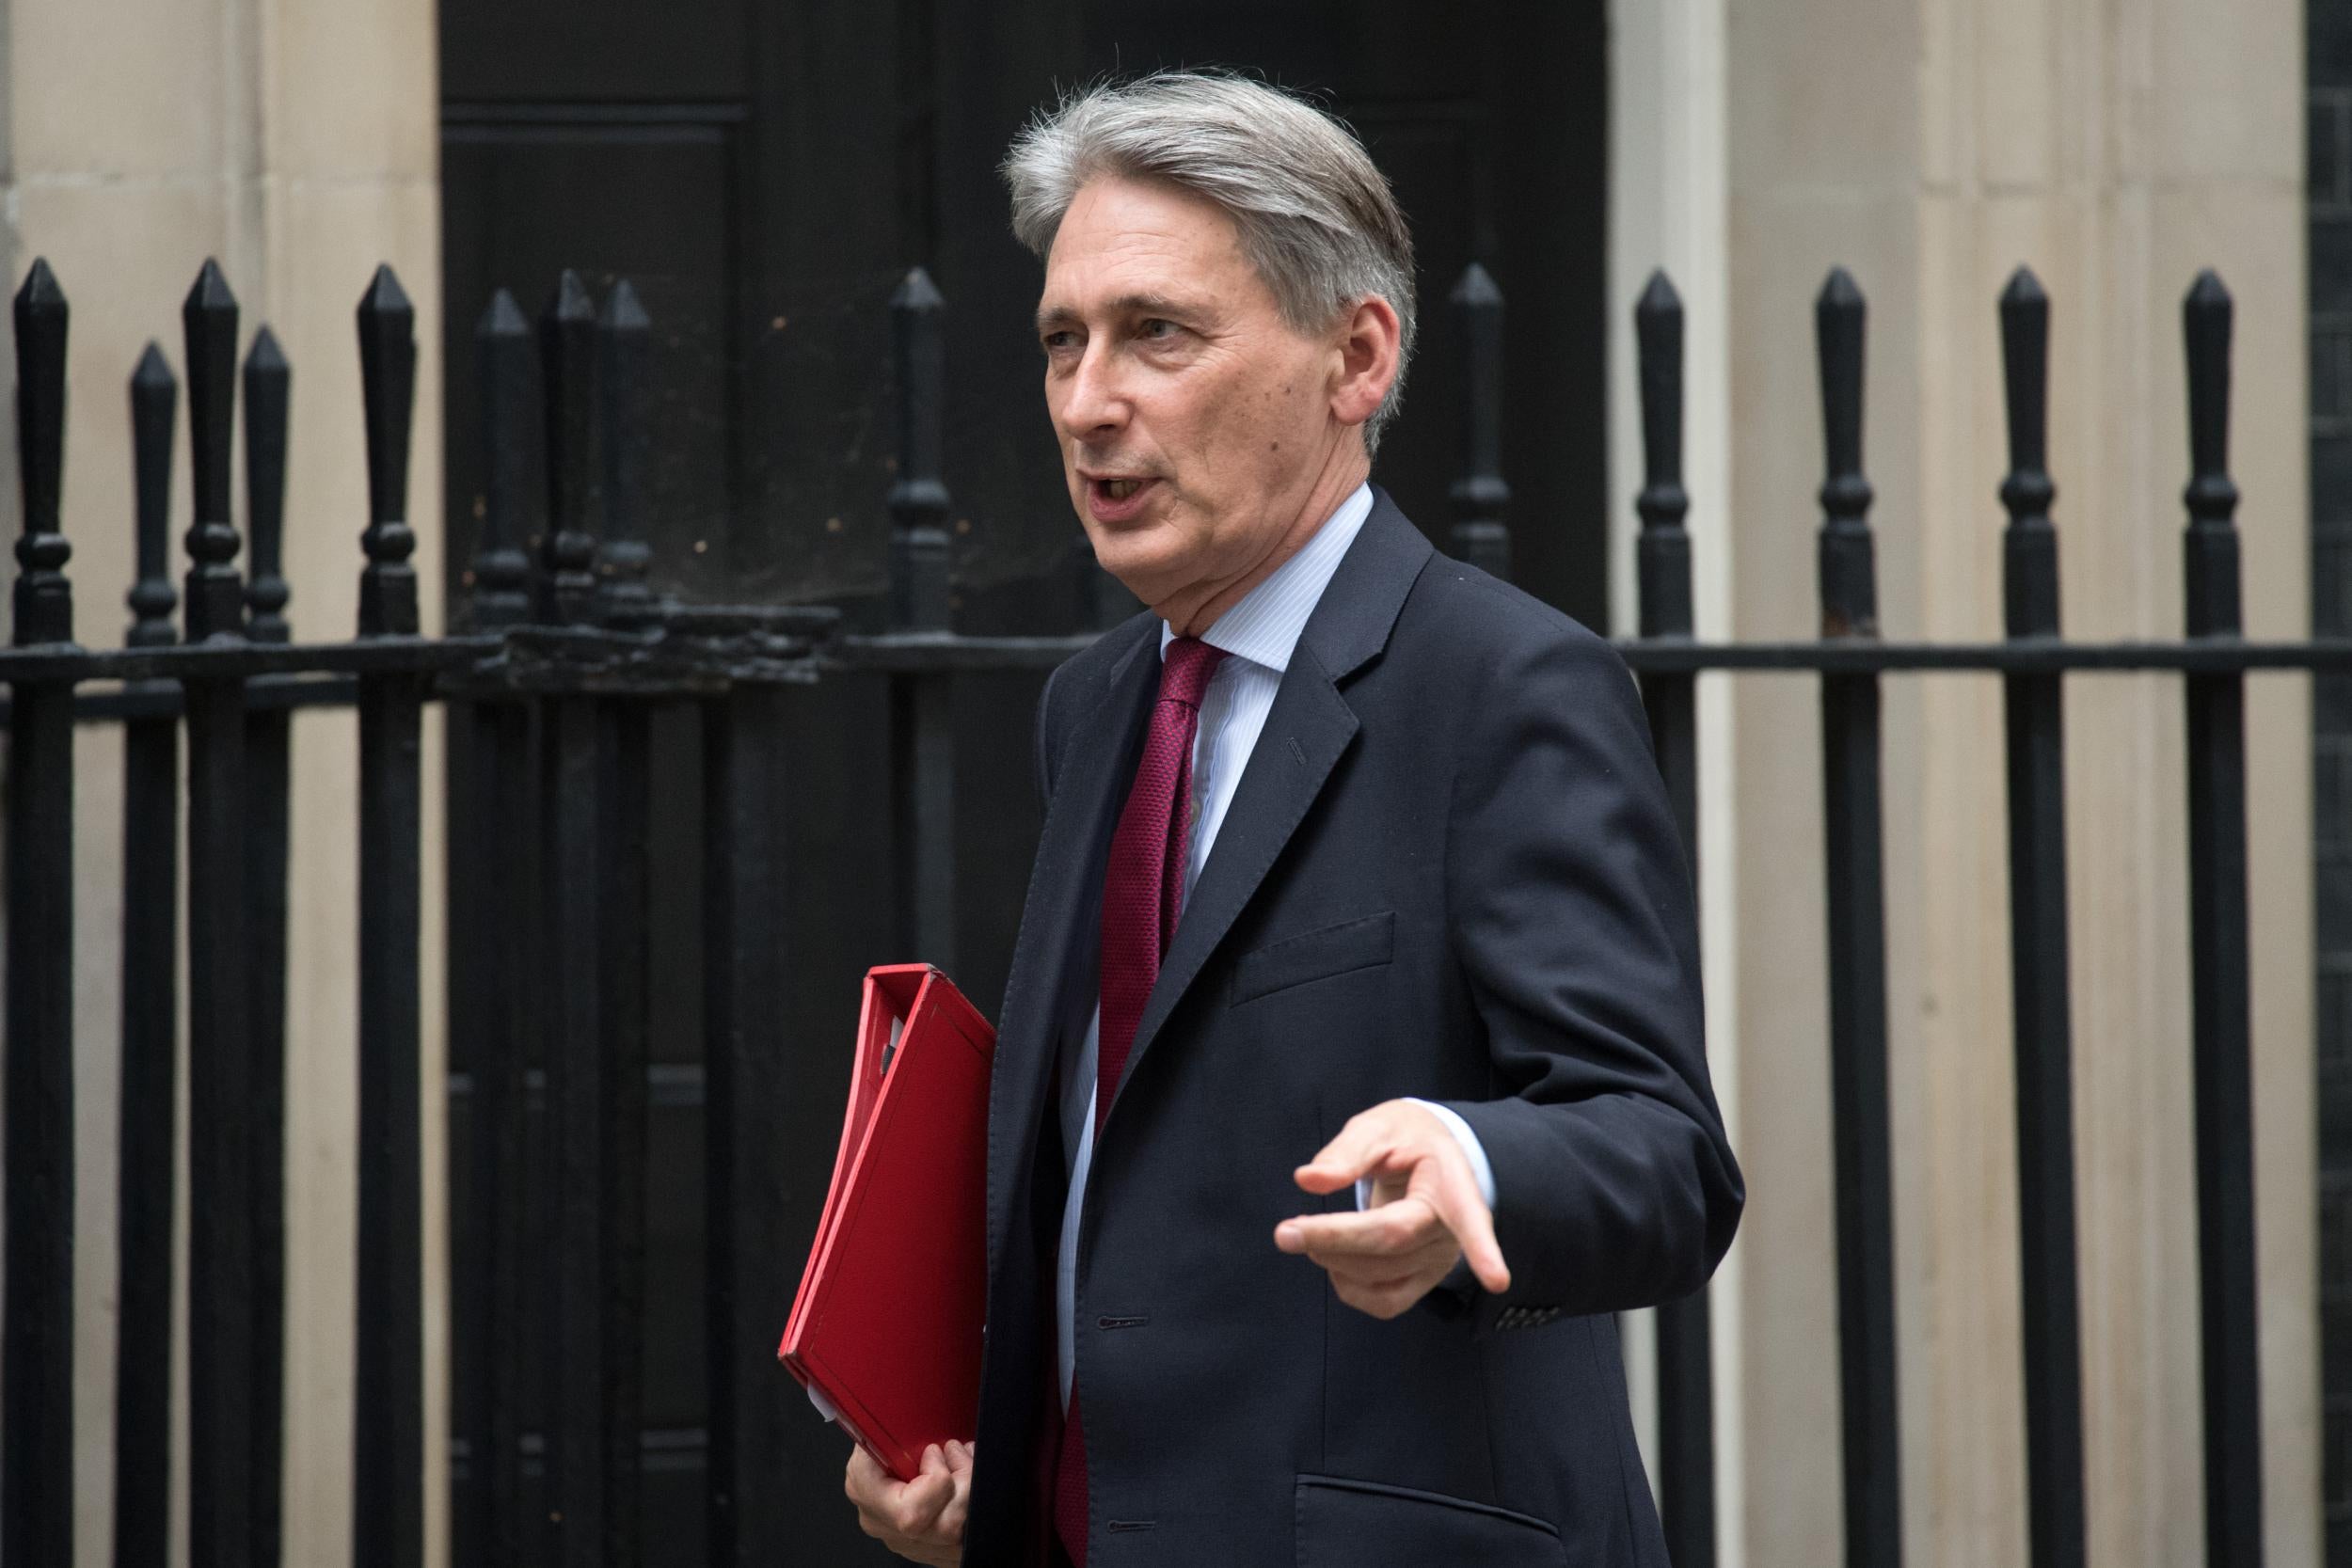 Chancellor Philip Hammond will give a speech on Brexit in Berlin